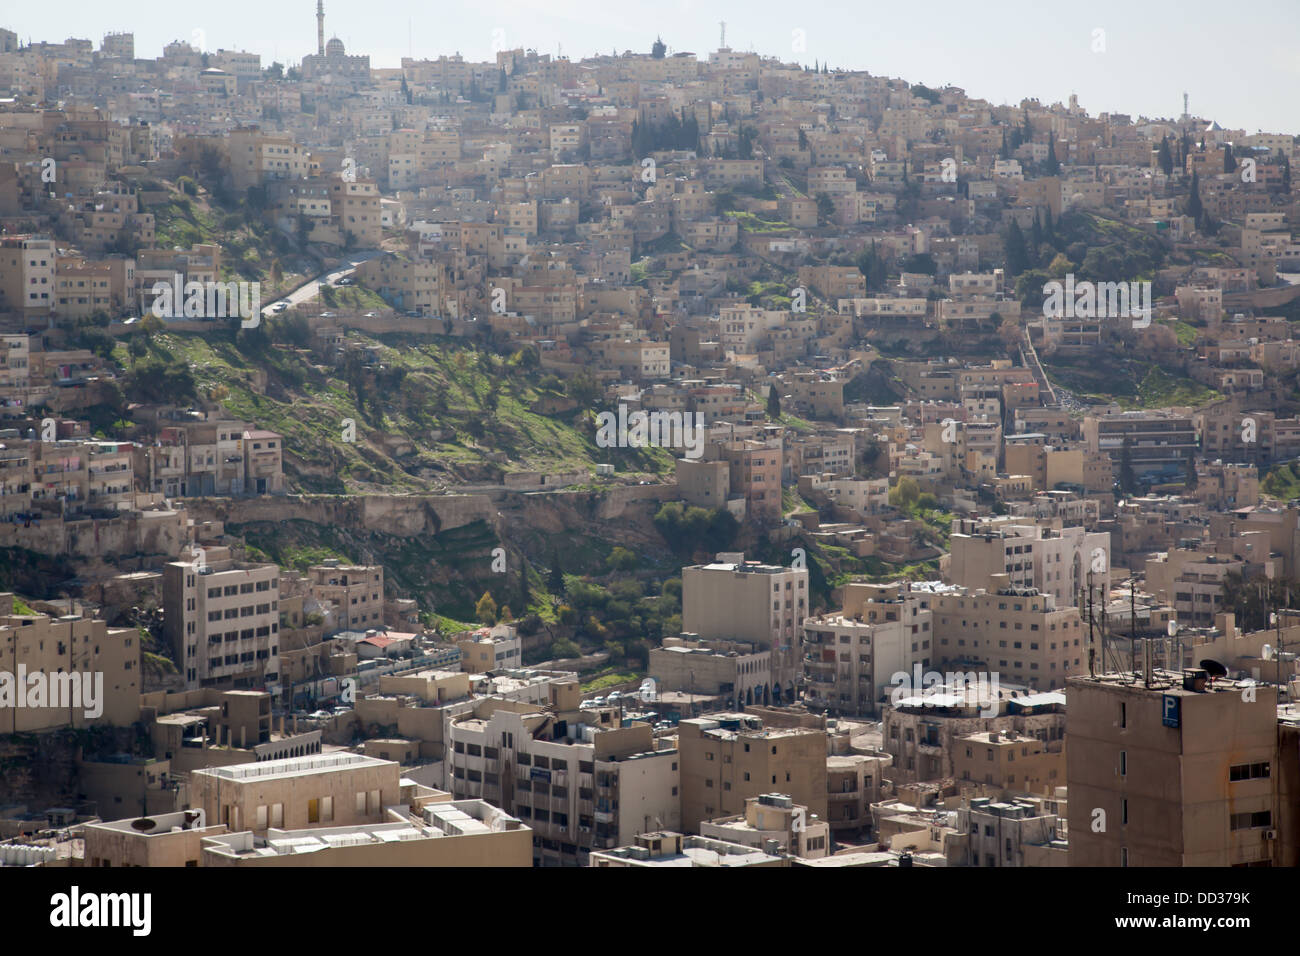 Amman, Jordan, from the Citadel. CIRCA Feb. 2013. Ruins in the middle of a Middle East City Stock Photo